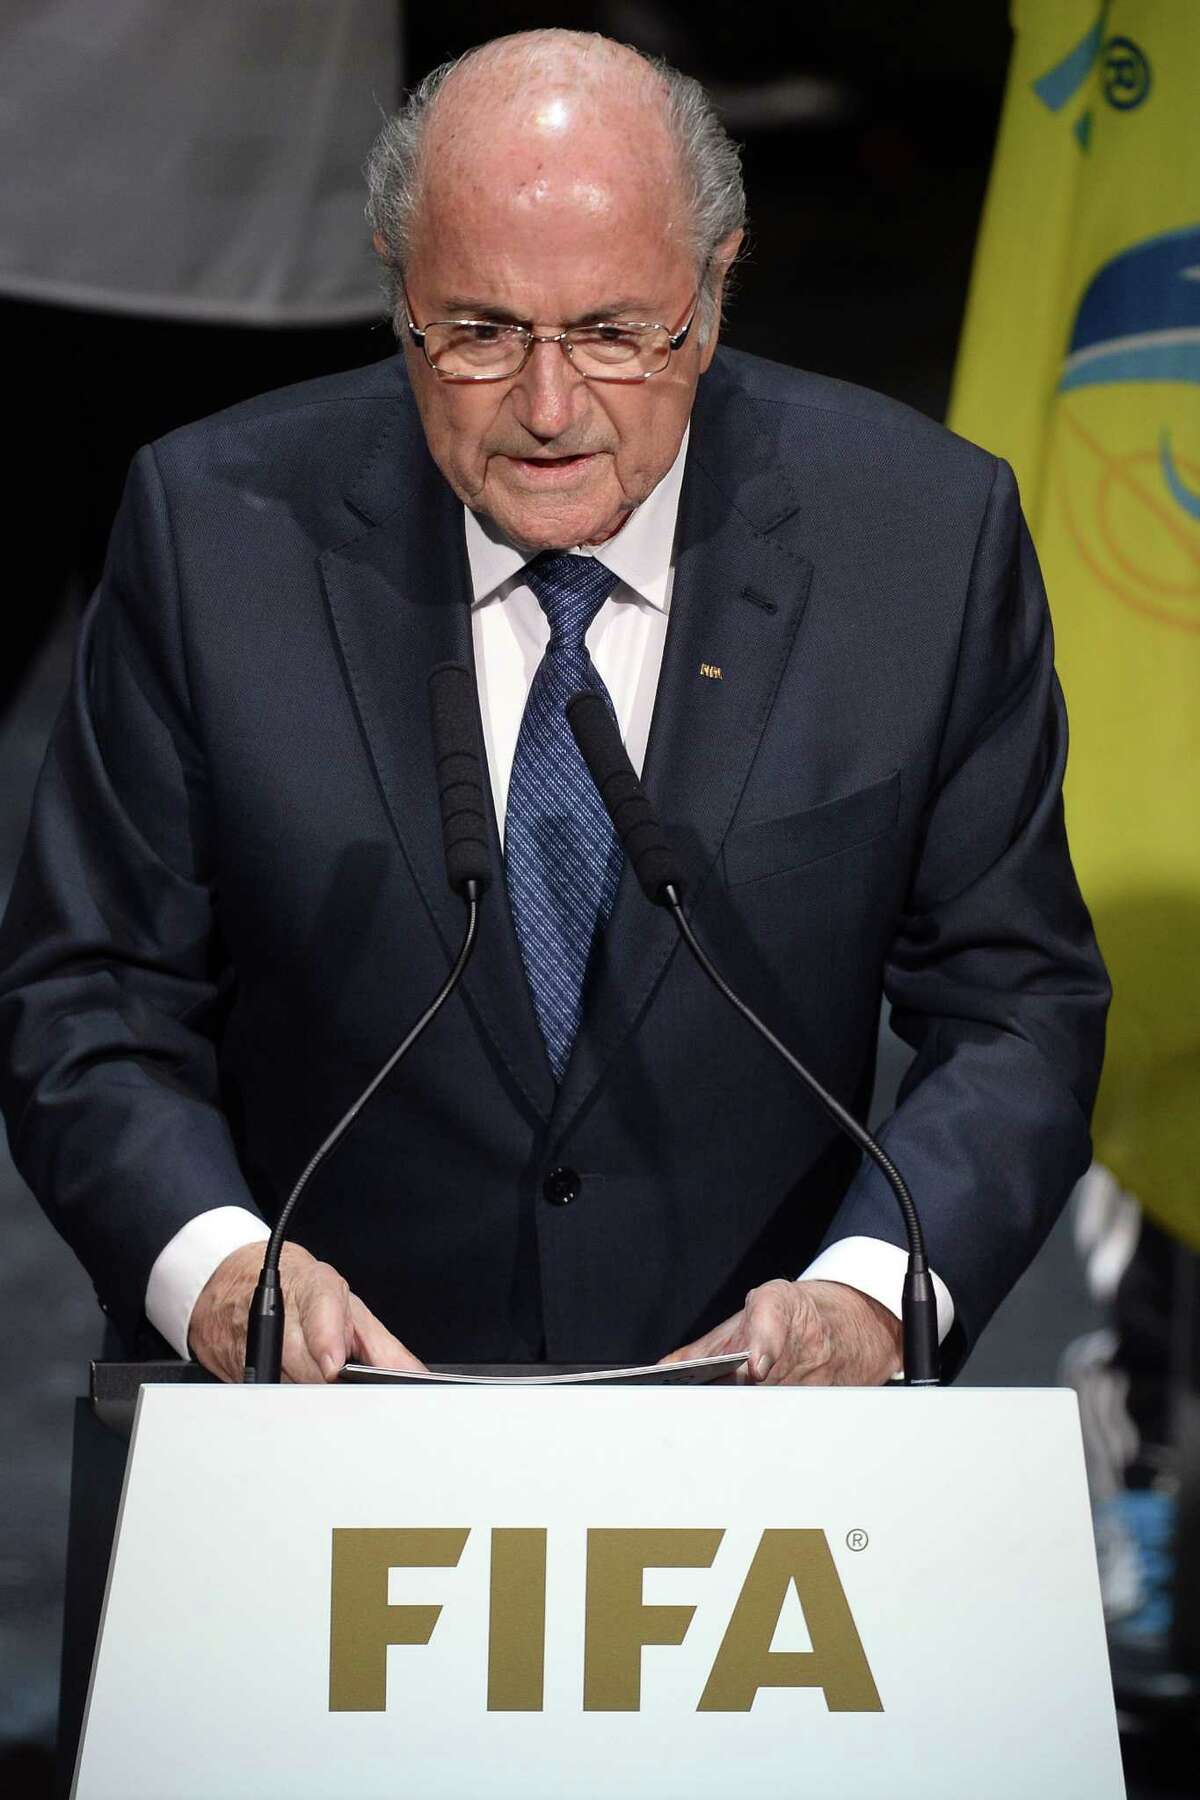 FIFA President Sepp Blatter speaks at the opening ceremony of the FIFA congress in Zuerich, Switzerland, Thursday. The FIFA congress with the president’s election is scheduled for Friday in Zurich.